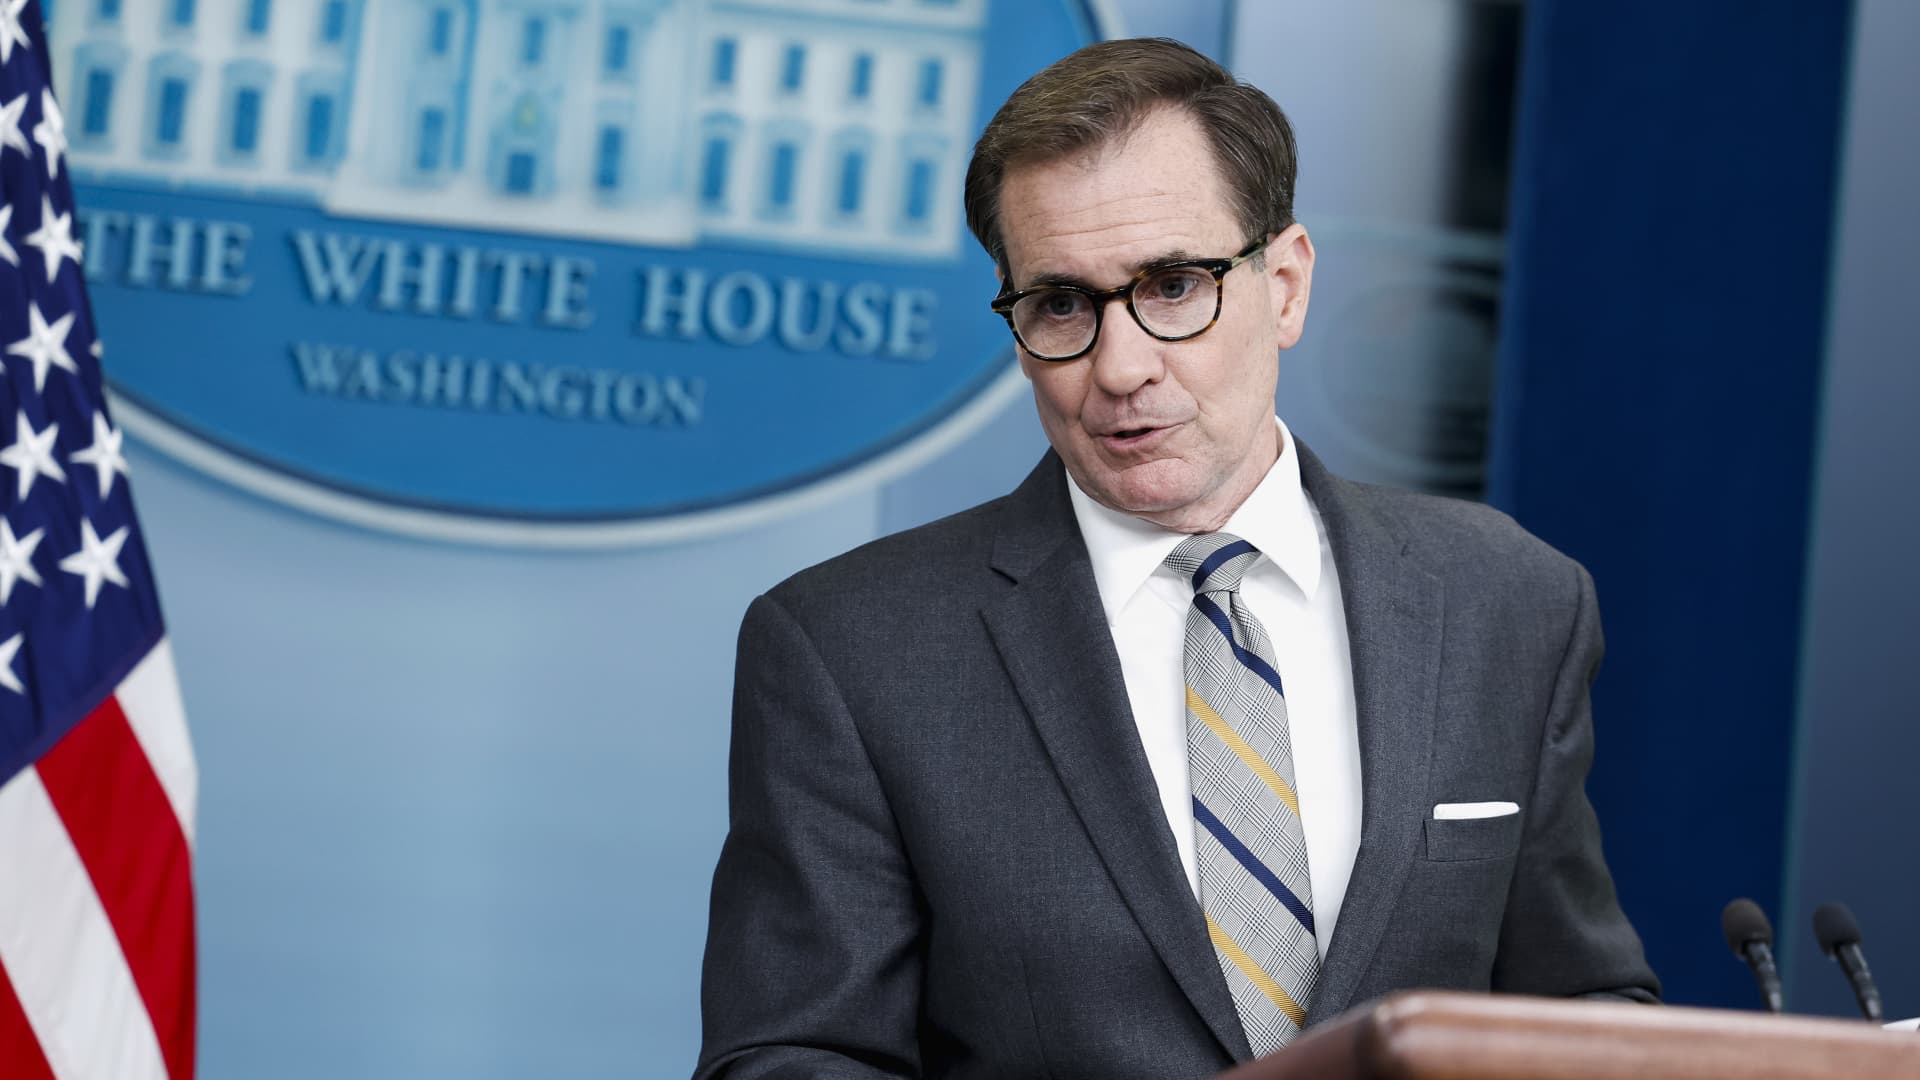 National Security Council coordinator for strategic communications John Kirby speaks during a daily news briefing at the James S. Brady Press Briefing Room in the White House on June 23, 2023 in Washington, DC.